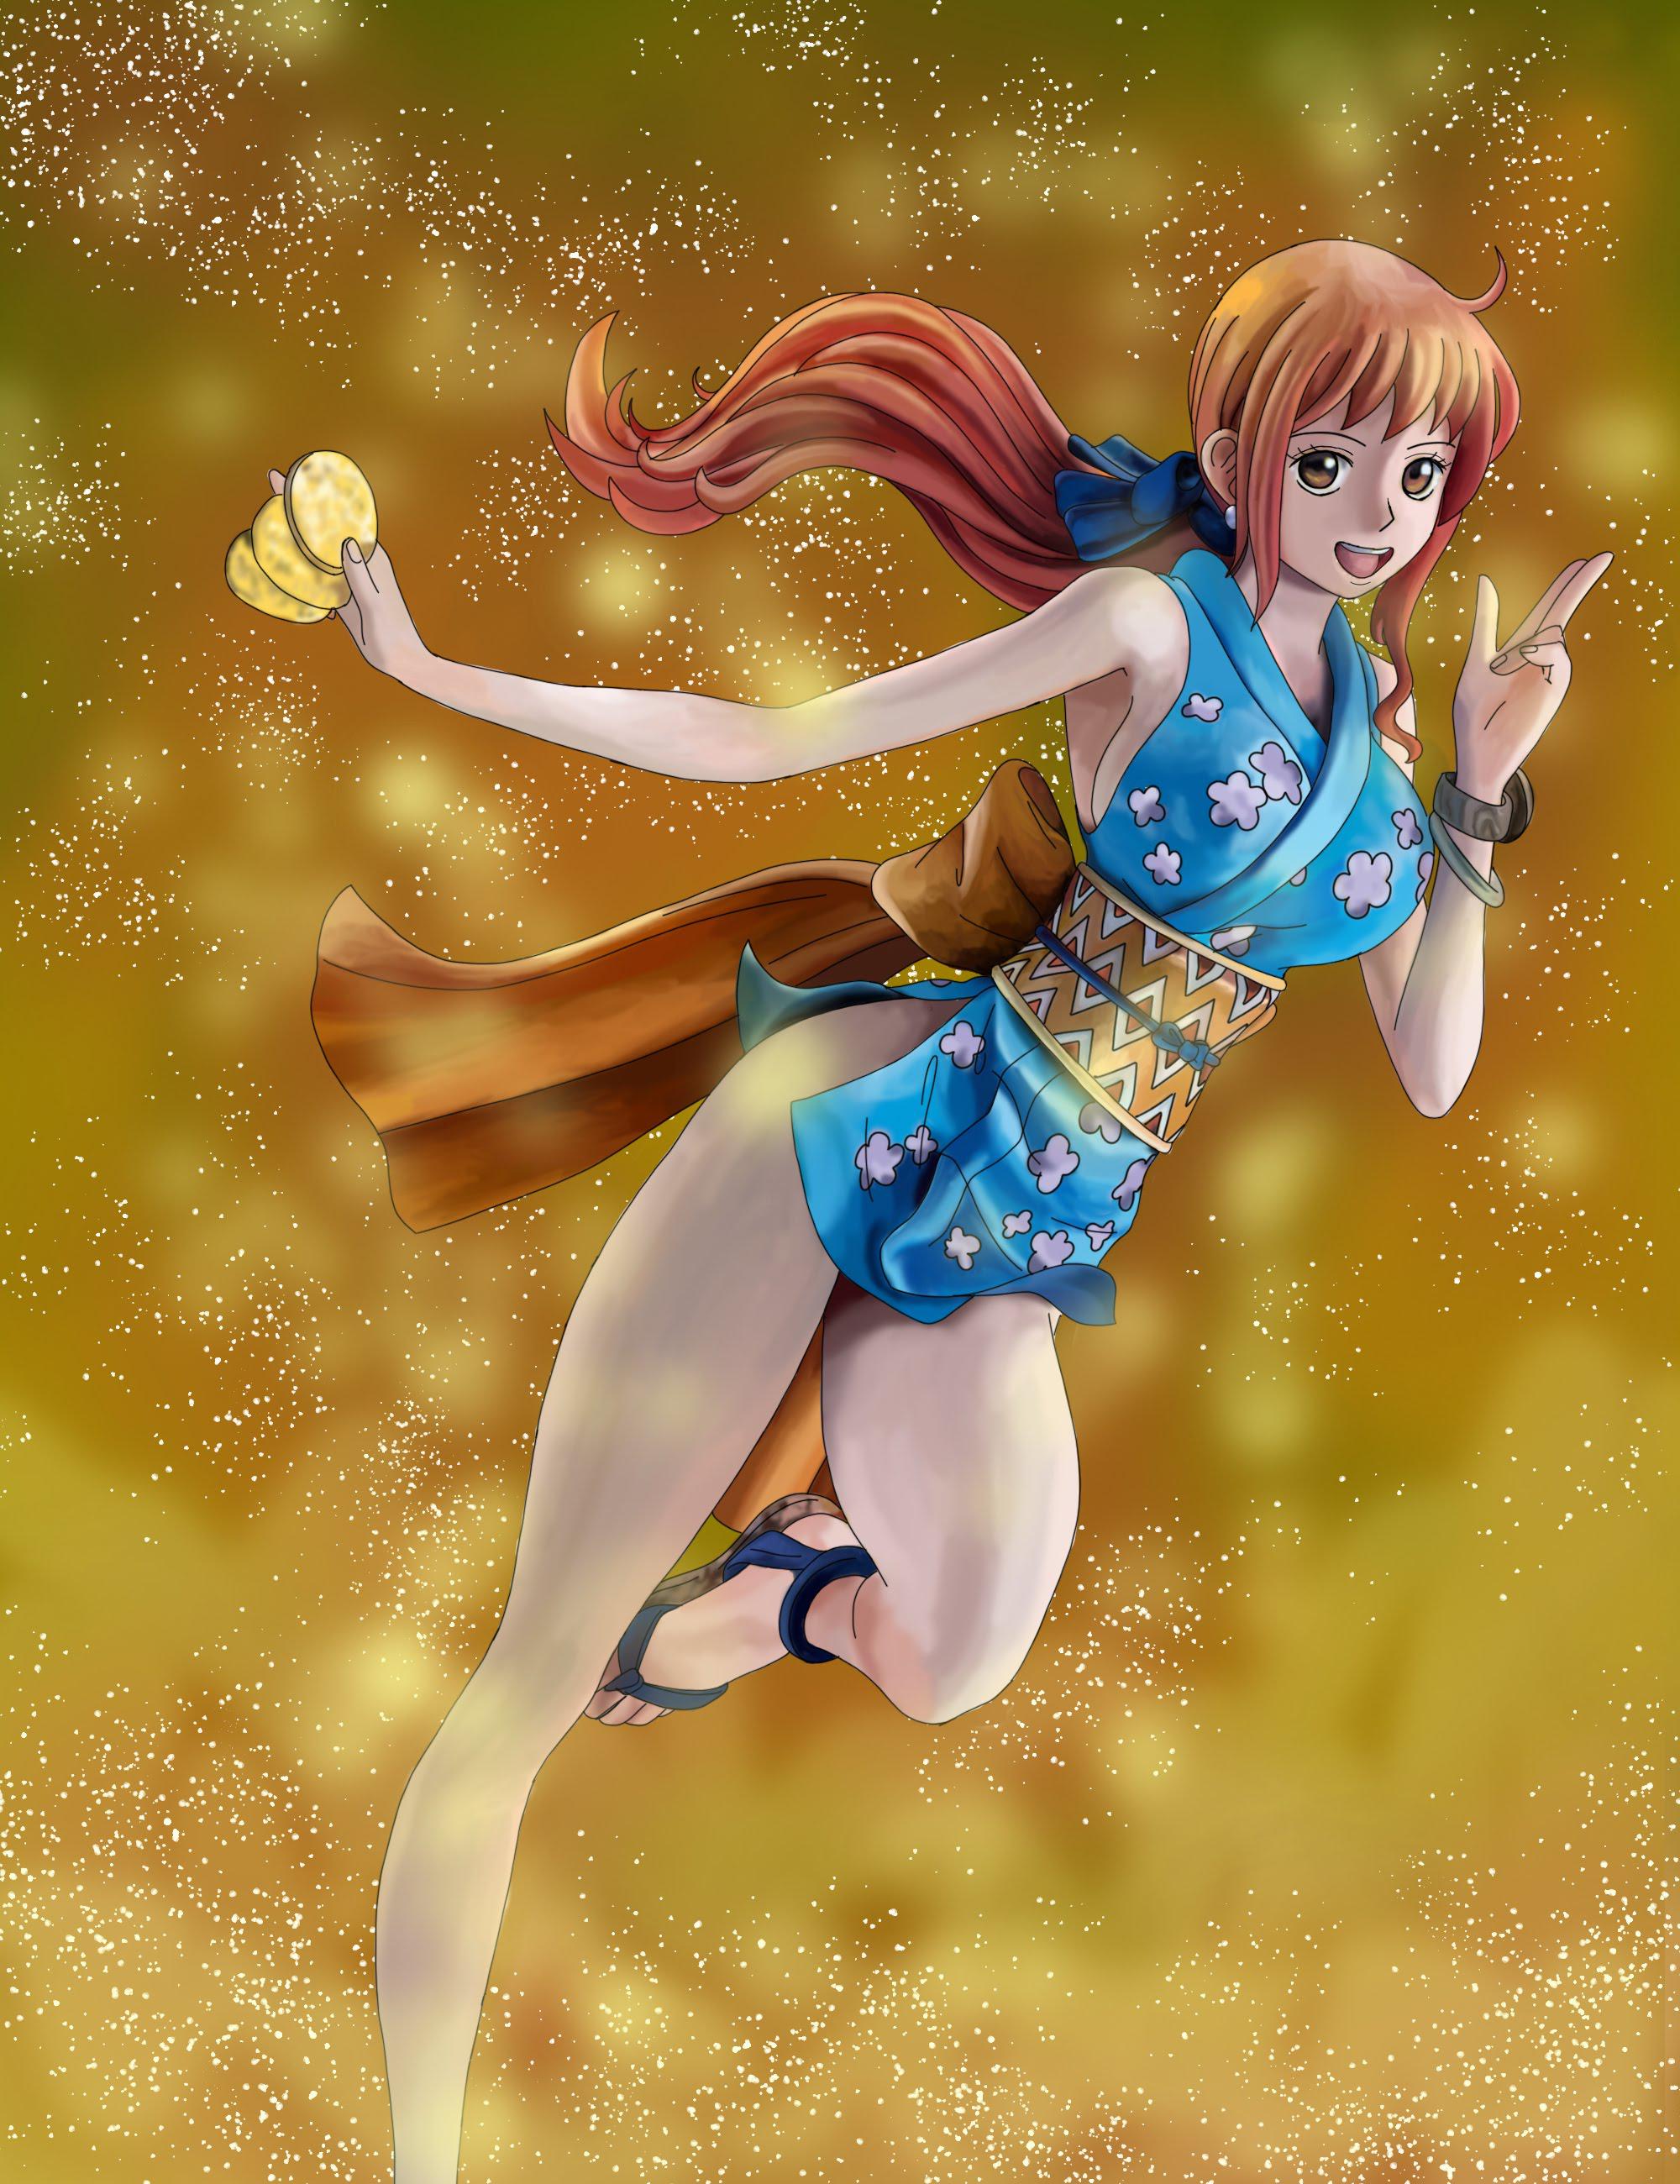 A fanart of nami in wano costume based on a figure